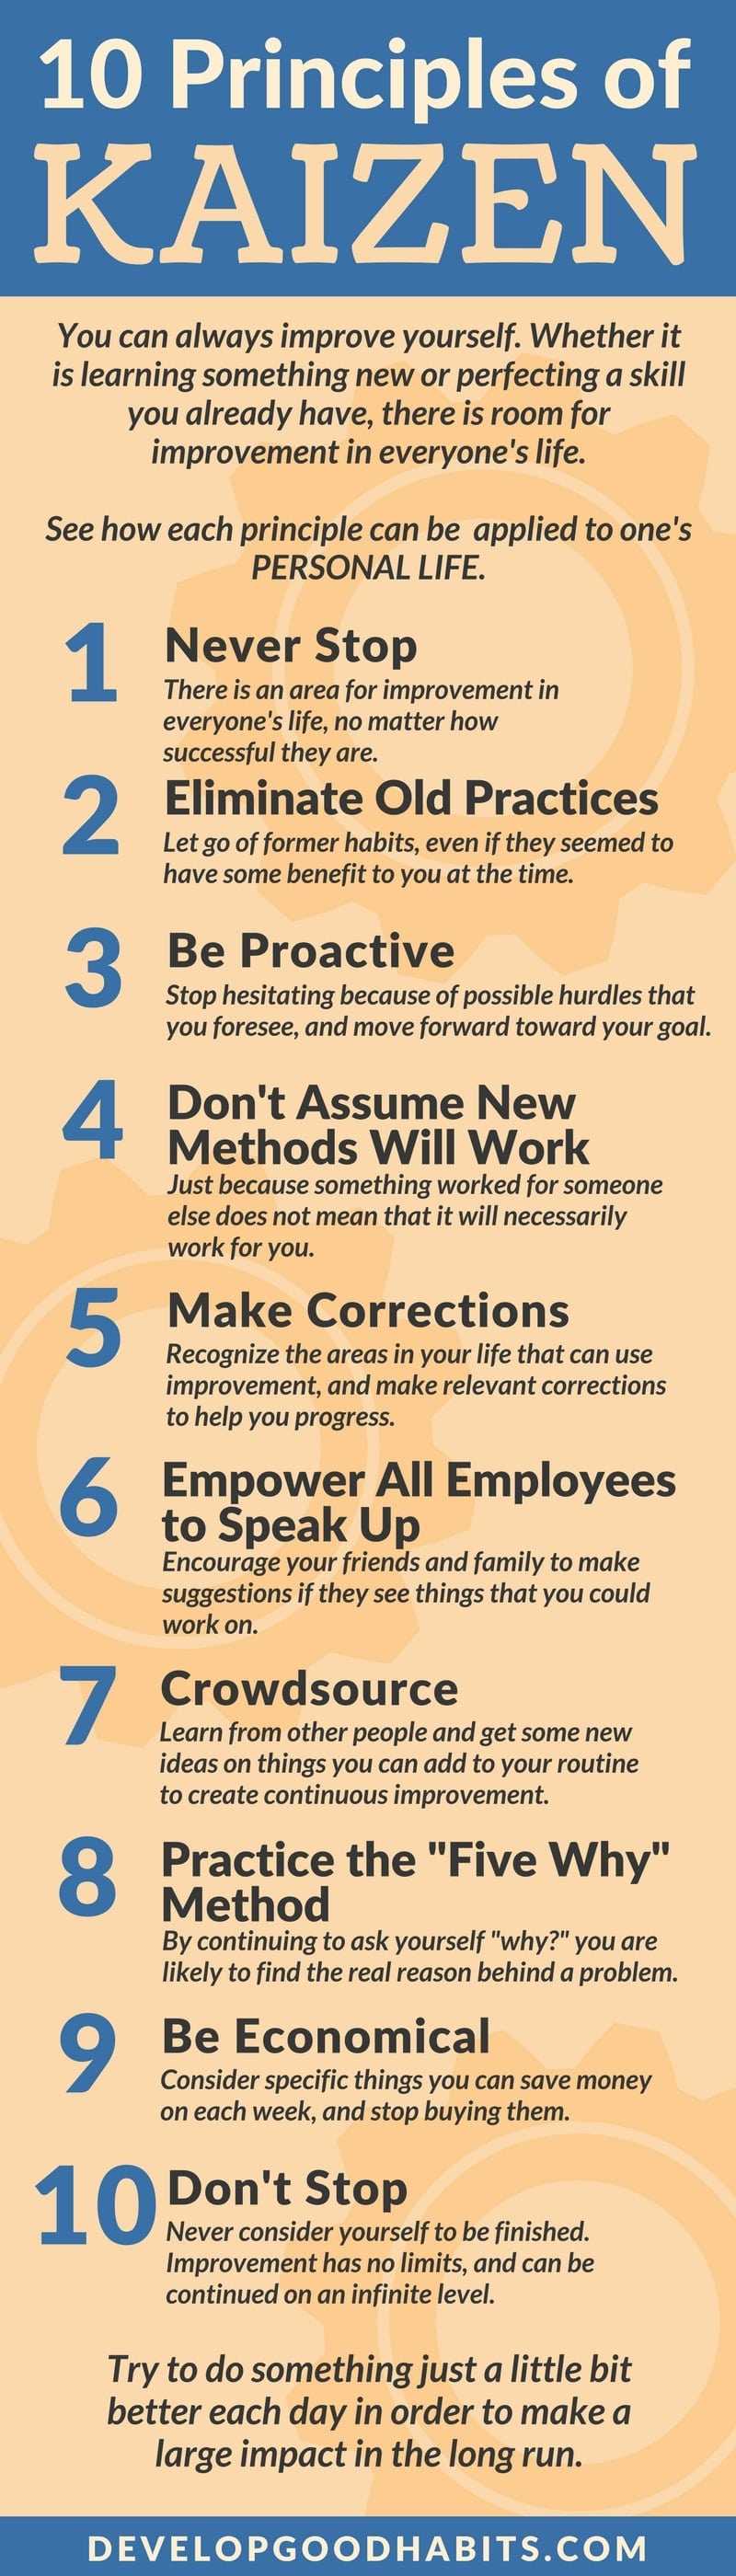 Use these kaizen principles in daily life for continuous improvement. #infographic #business #career #productivity #success #leadership #planning #purpose #gtd #productivitytips | 10 Principles of Kaizen | What is Kaizen | Kaizen Training  